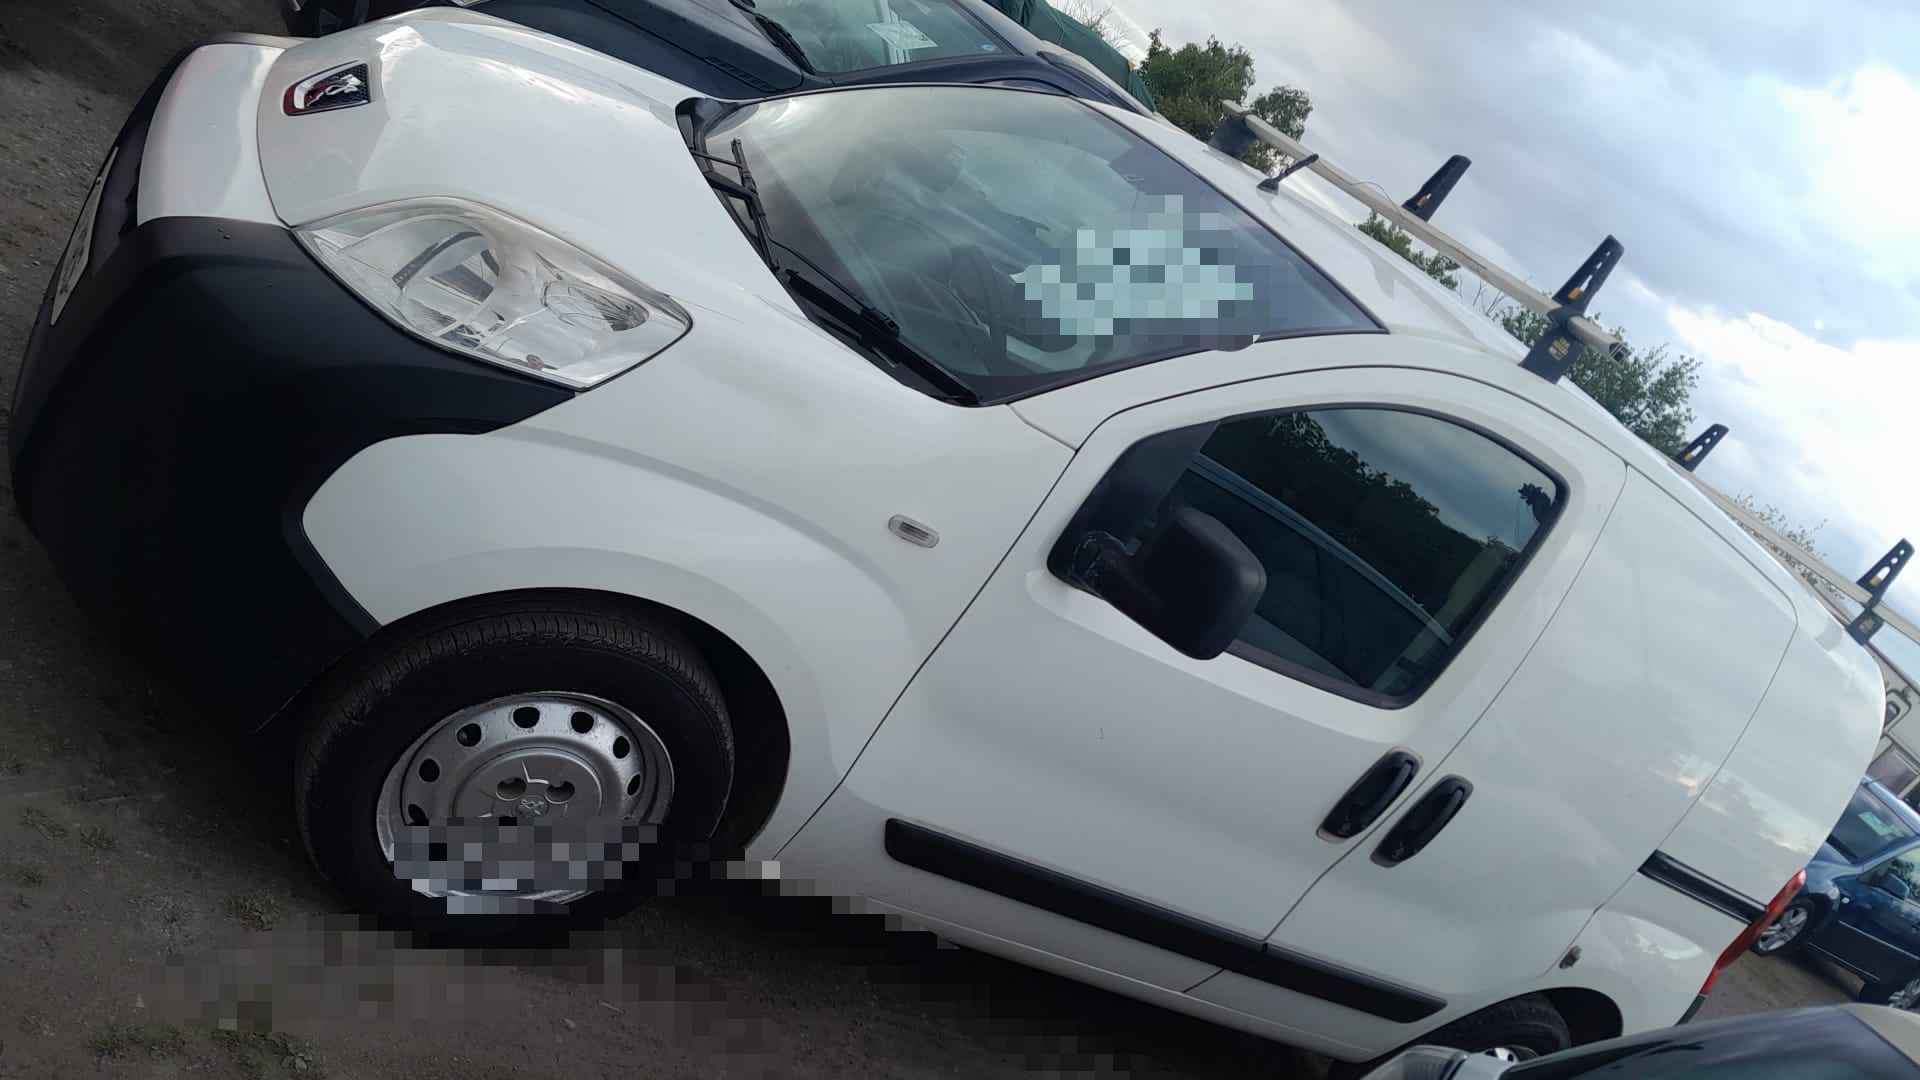 2012/61 PEUGEOT BIPPER S HDI white panel van, 124k Miles, low miles for the year *NO VAT* - Image 3 of 6